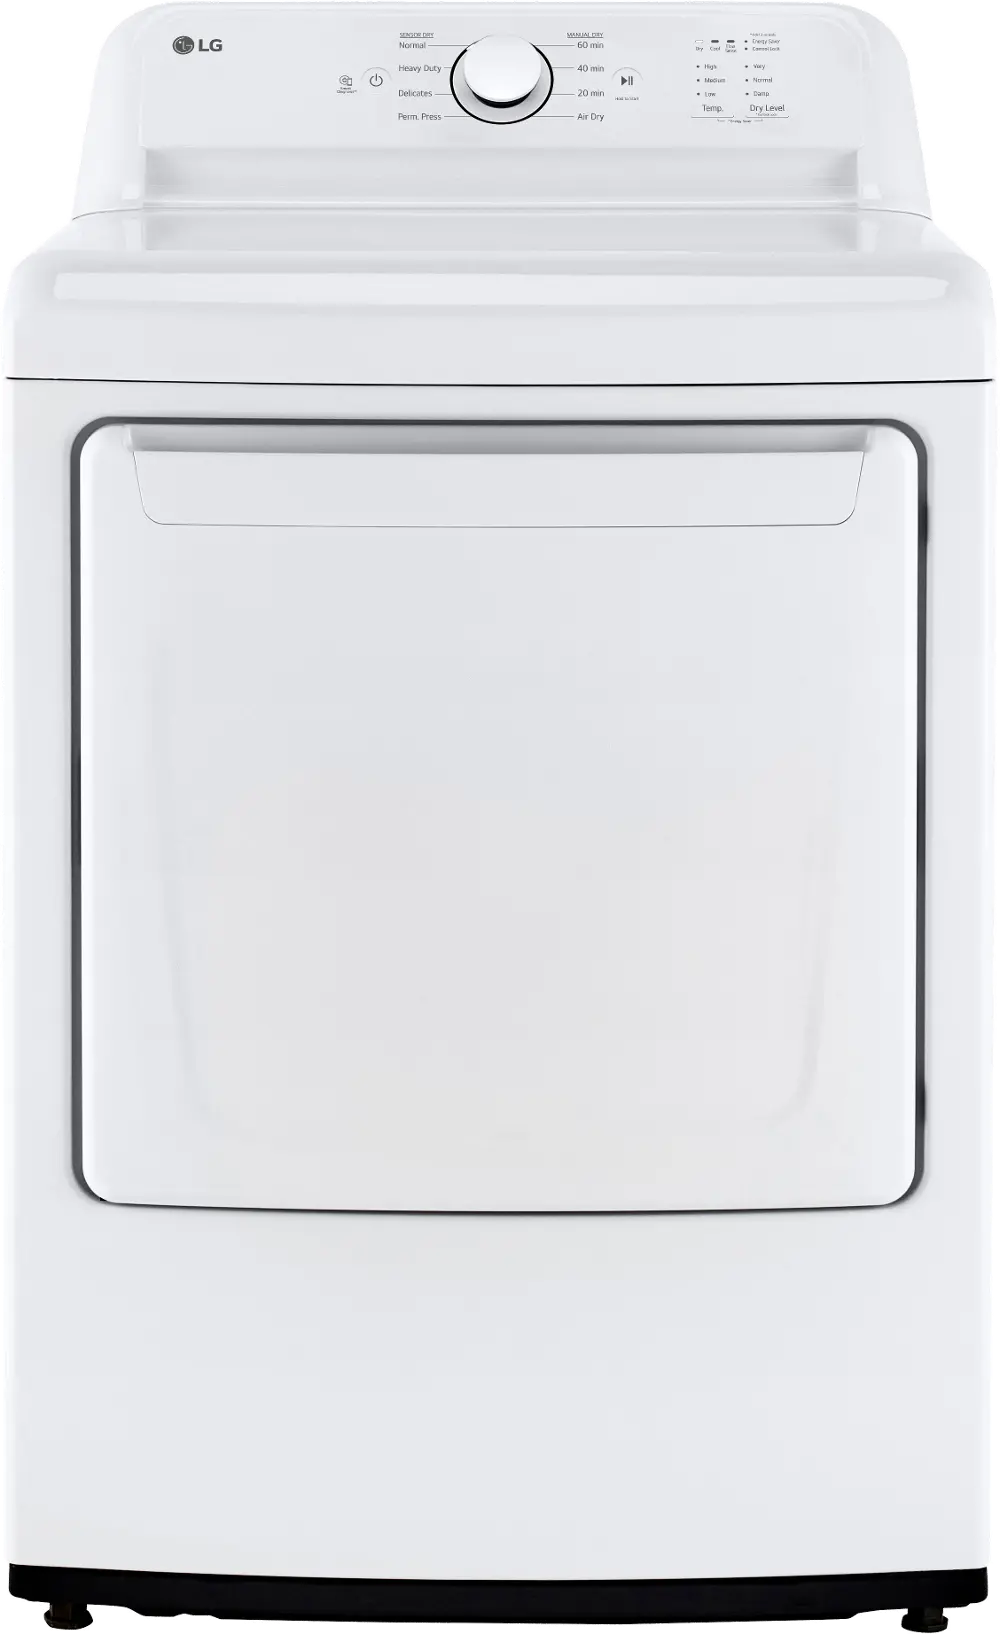 DLE6100W LG 7.4 cu ft Electric Dryer - White 6100-1